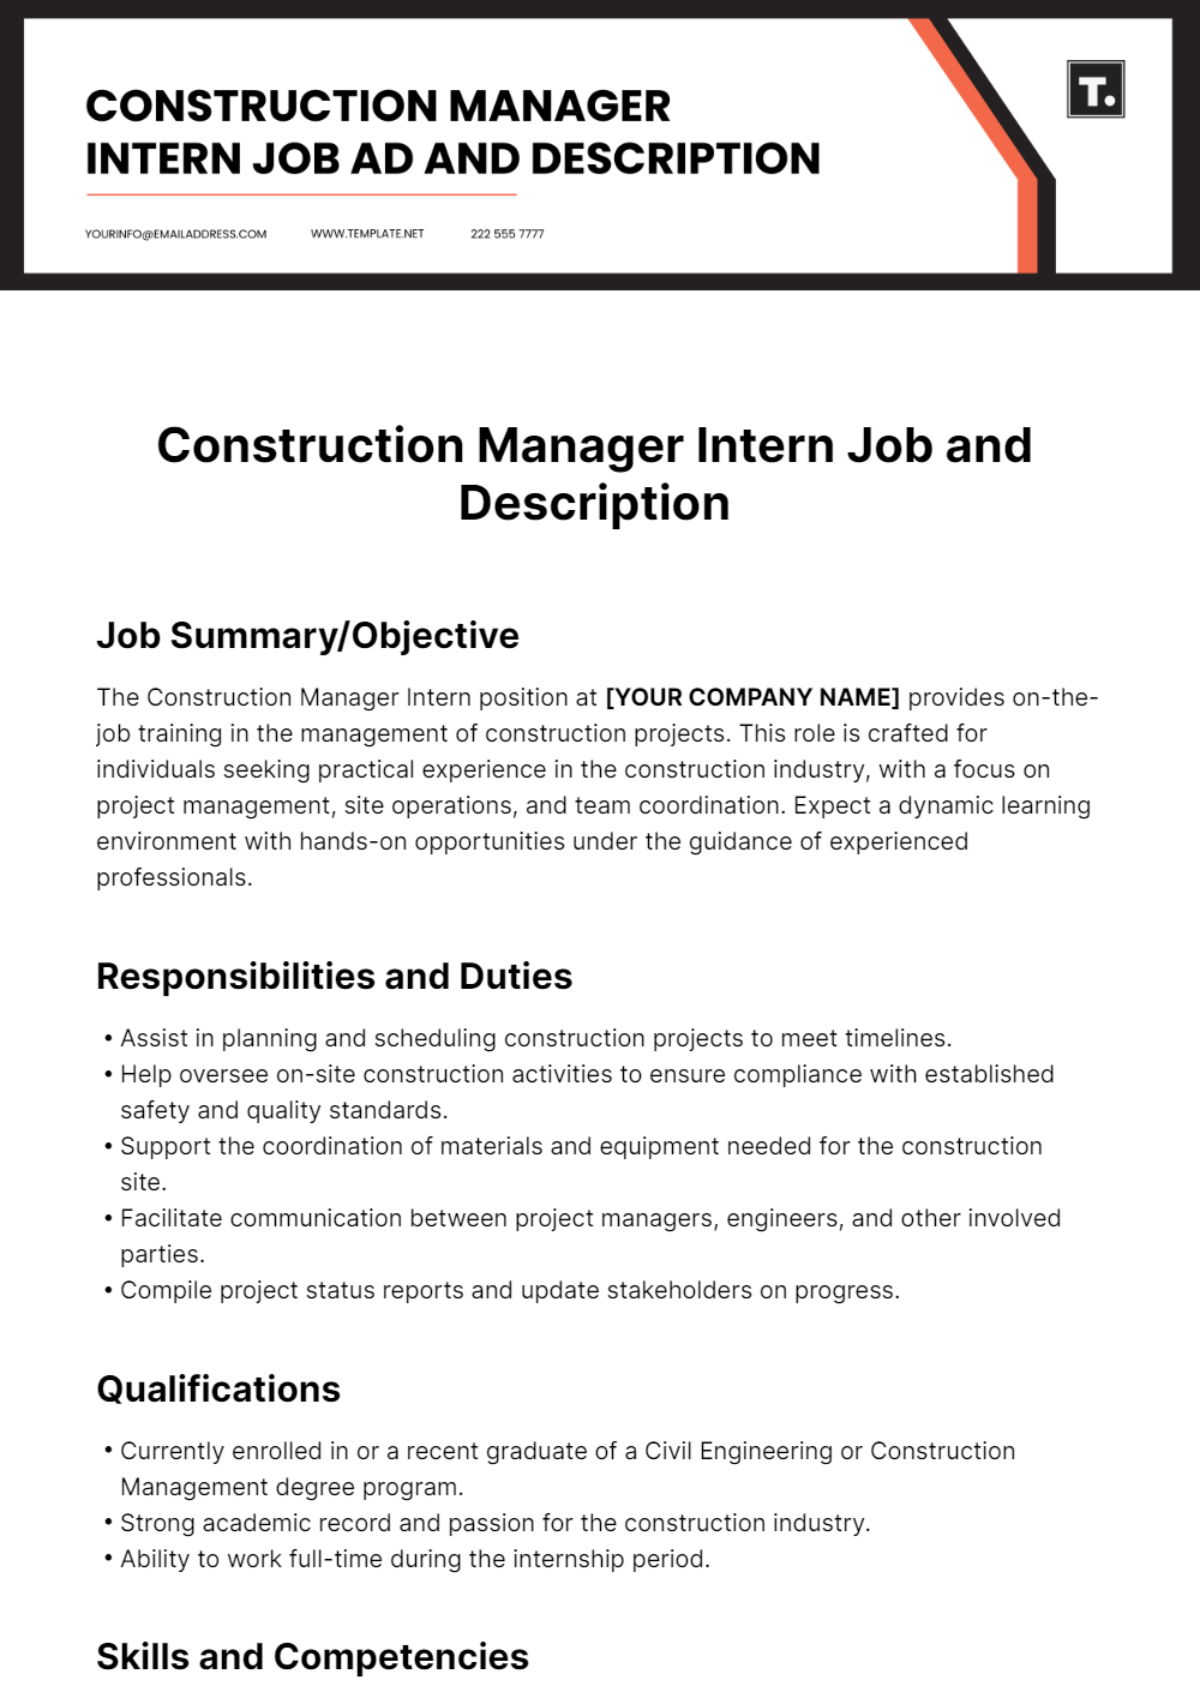 Free Construction Manager Intern Job Ad and Description Template